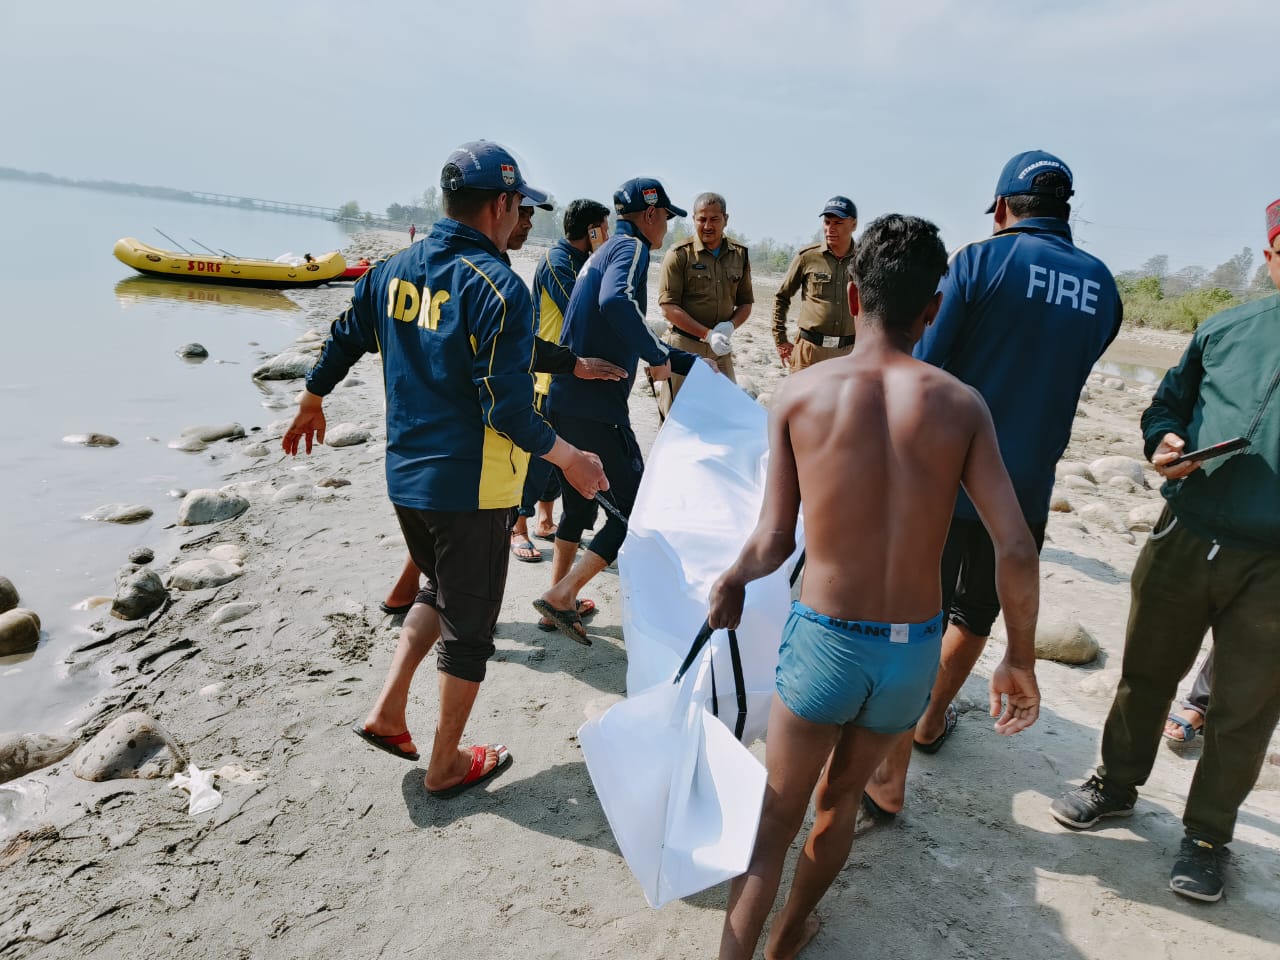 sdrf recovered two bodies